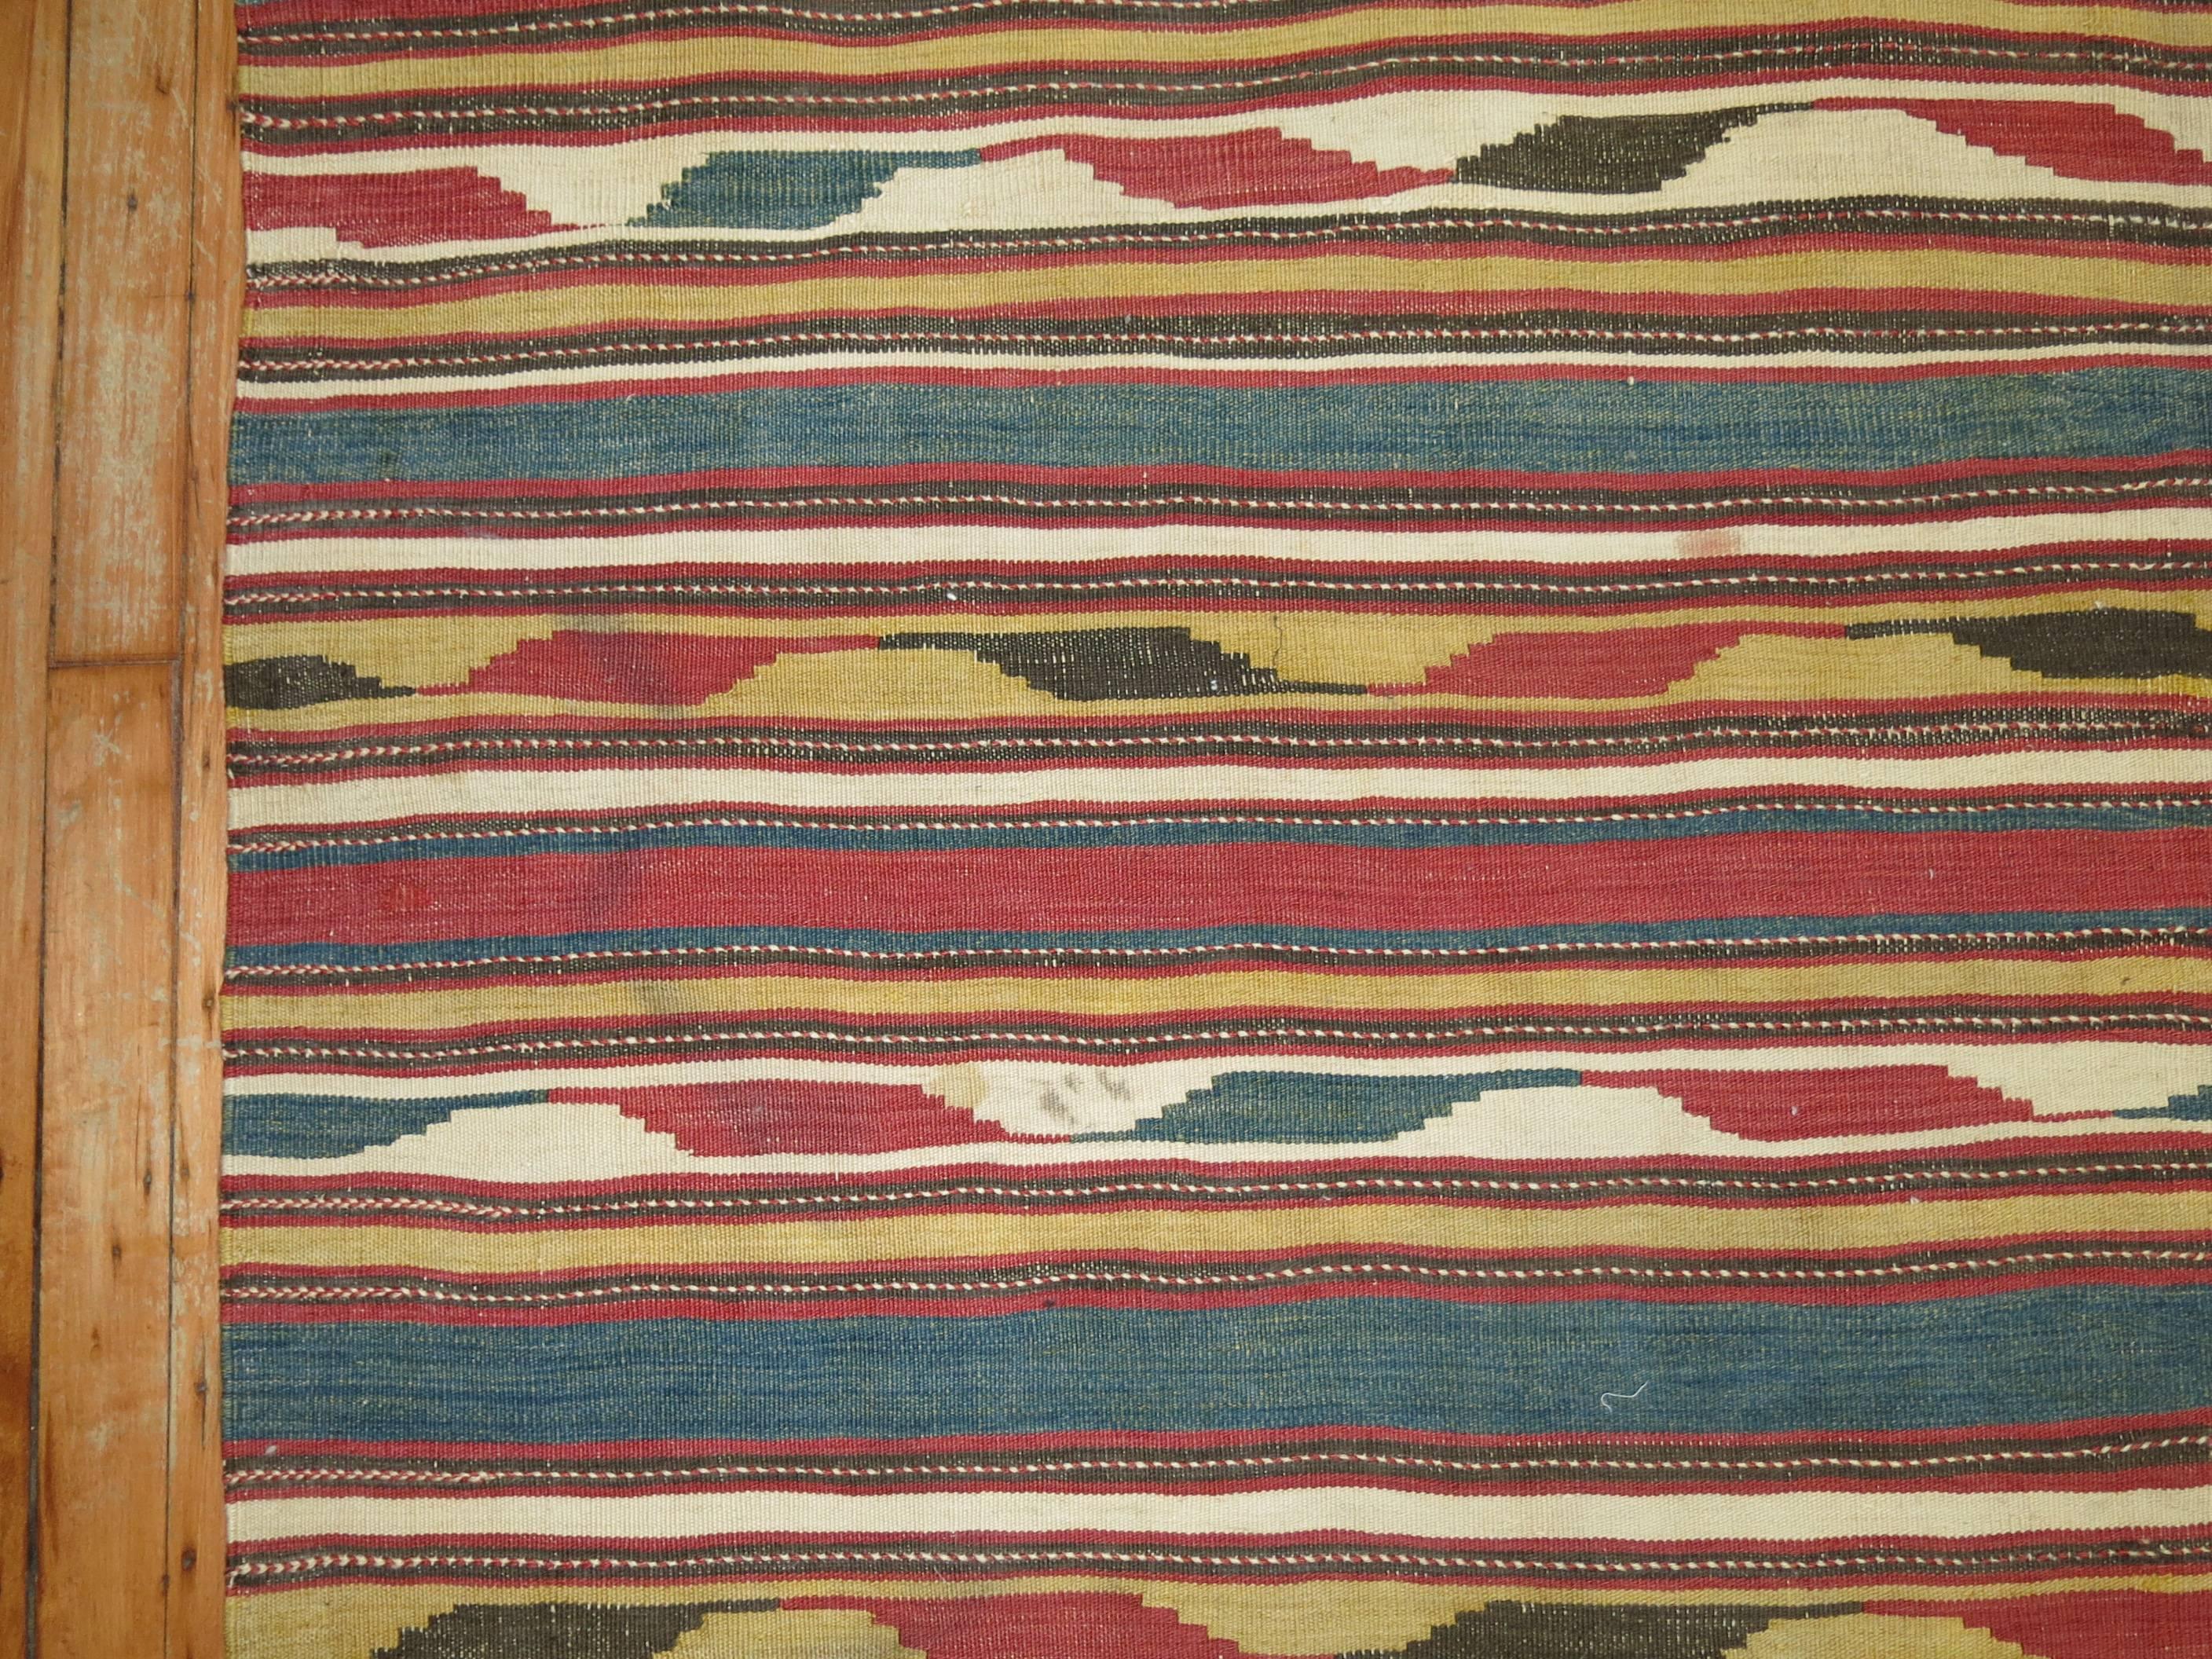 Tribal Rustic Persian Wool Handmade Kilim Green Mustard Red Accent In Good Condition For Sale In New York, NY